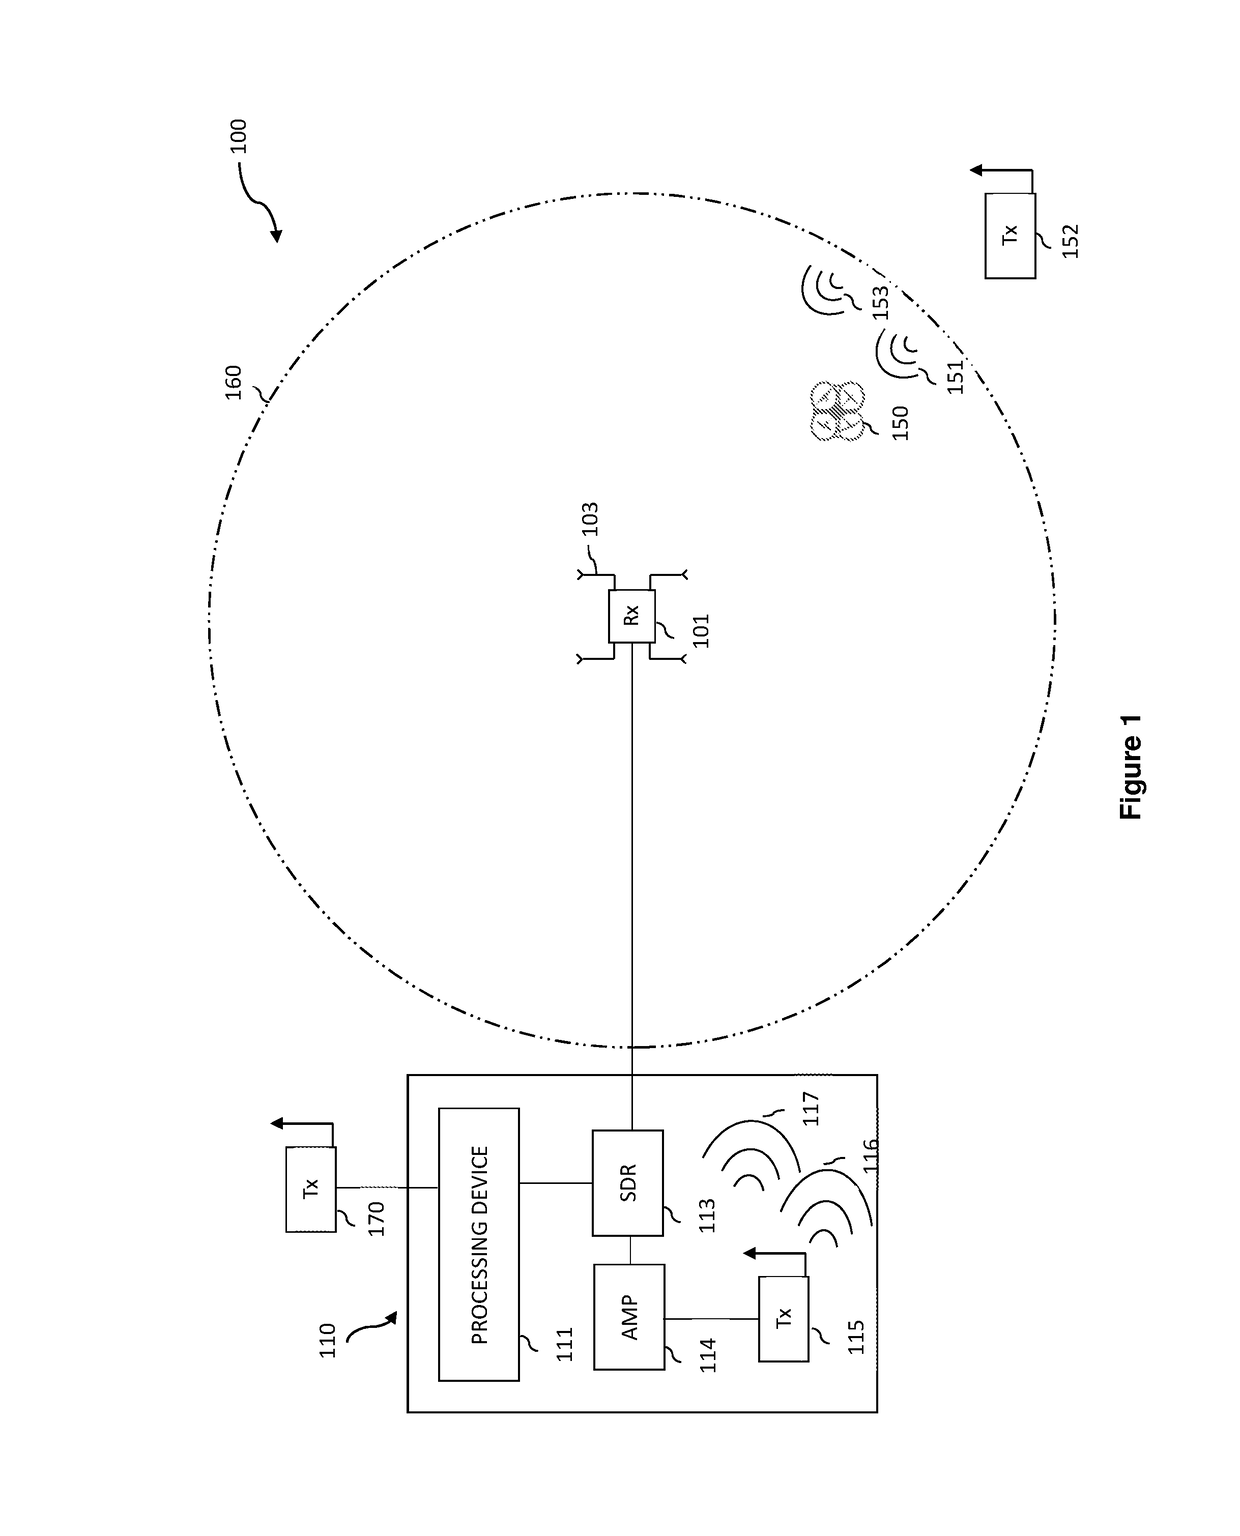 System and method for detecting and defeating a drone